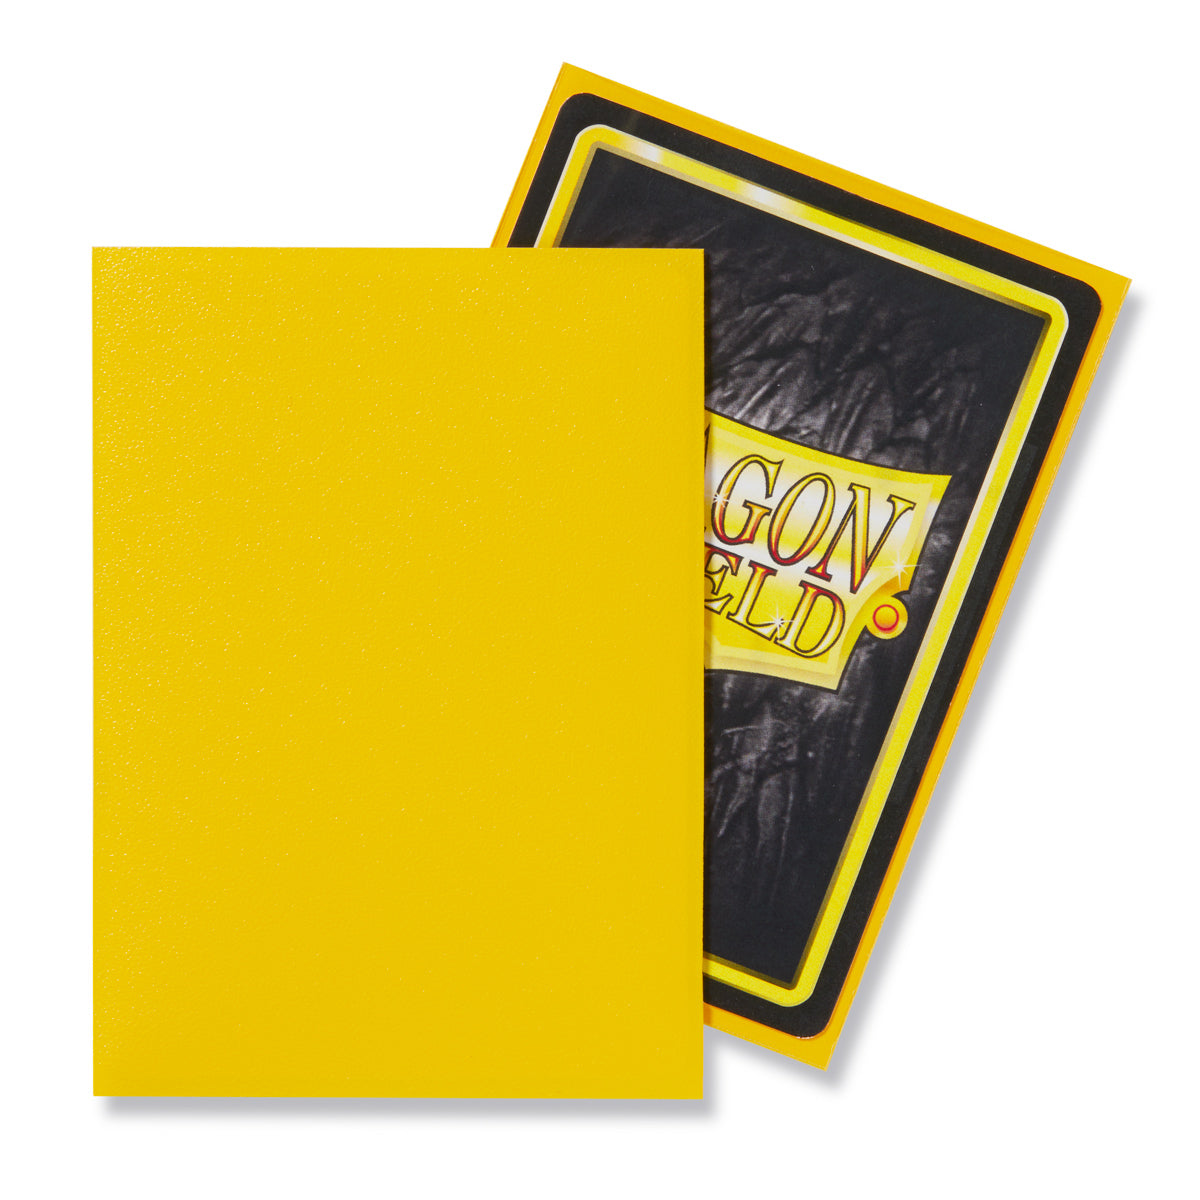 Dragon Shield Deck Protector Sleeves - Matte Yellow (100 Count)